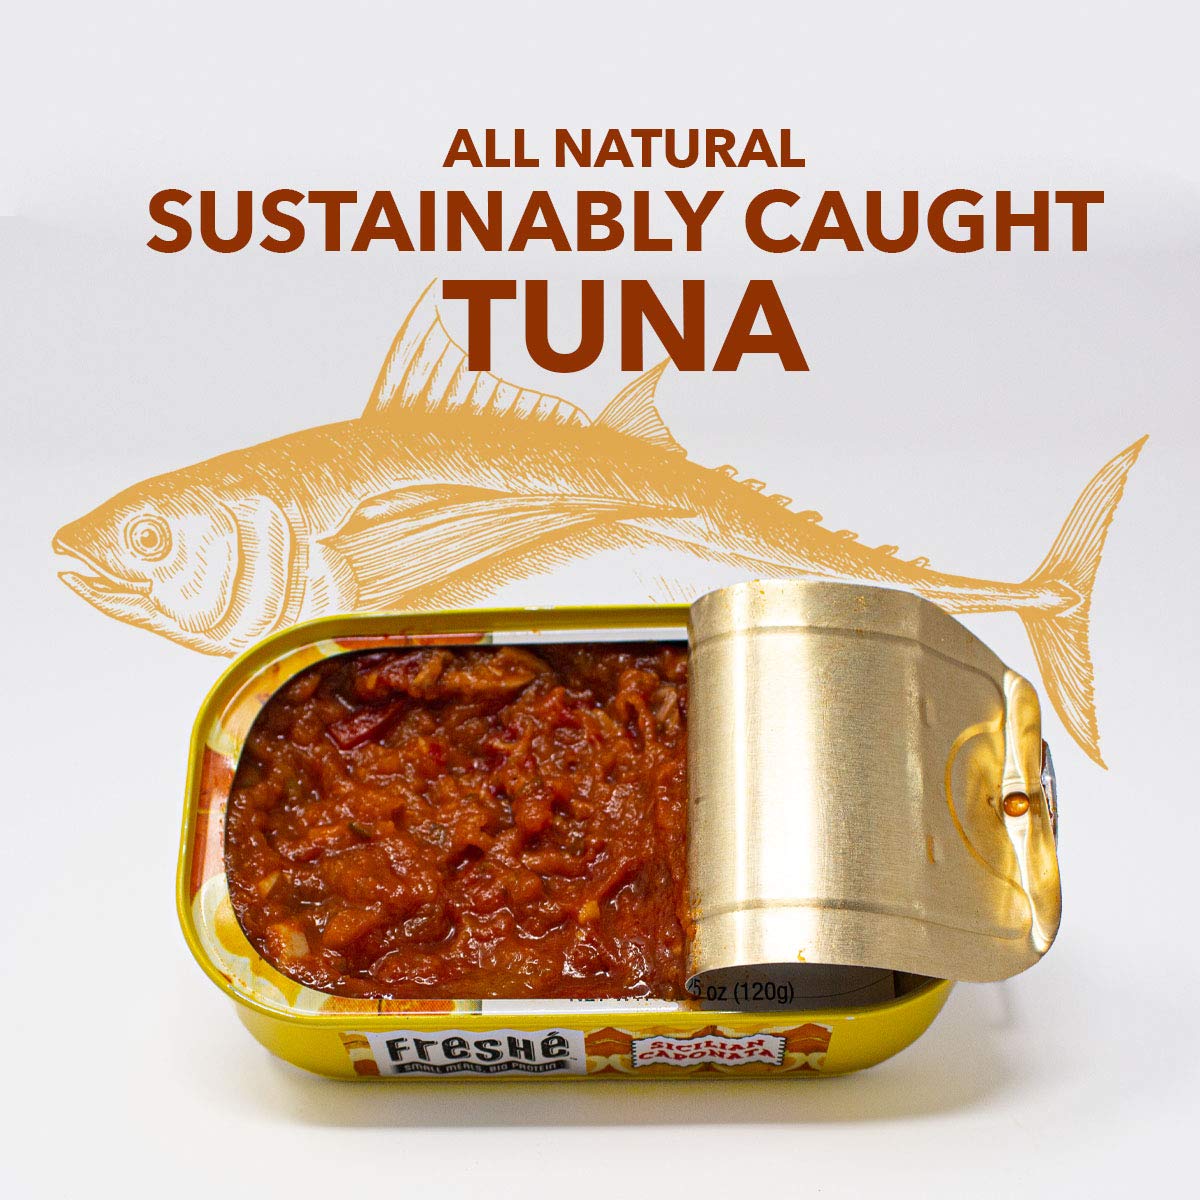 Freshé Gourmet Canned Tuna (Sicilian Caponata, 10 pack of 4.25 oz. tin) Freshly Packaged Skipjack Tuna Fish - Sustainably Caught - Perfect Gluten Free, High Protein Backpacking Food